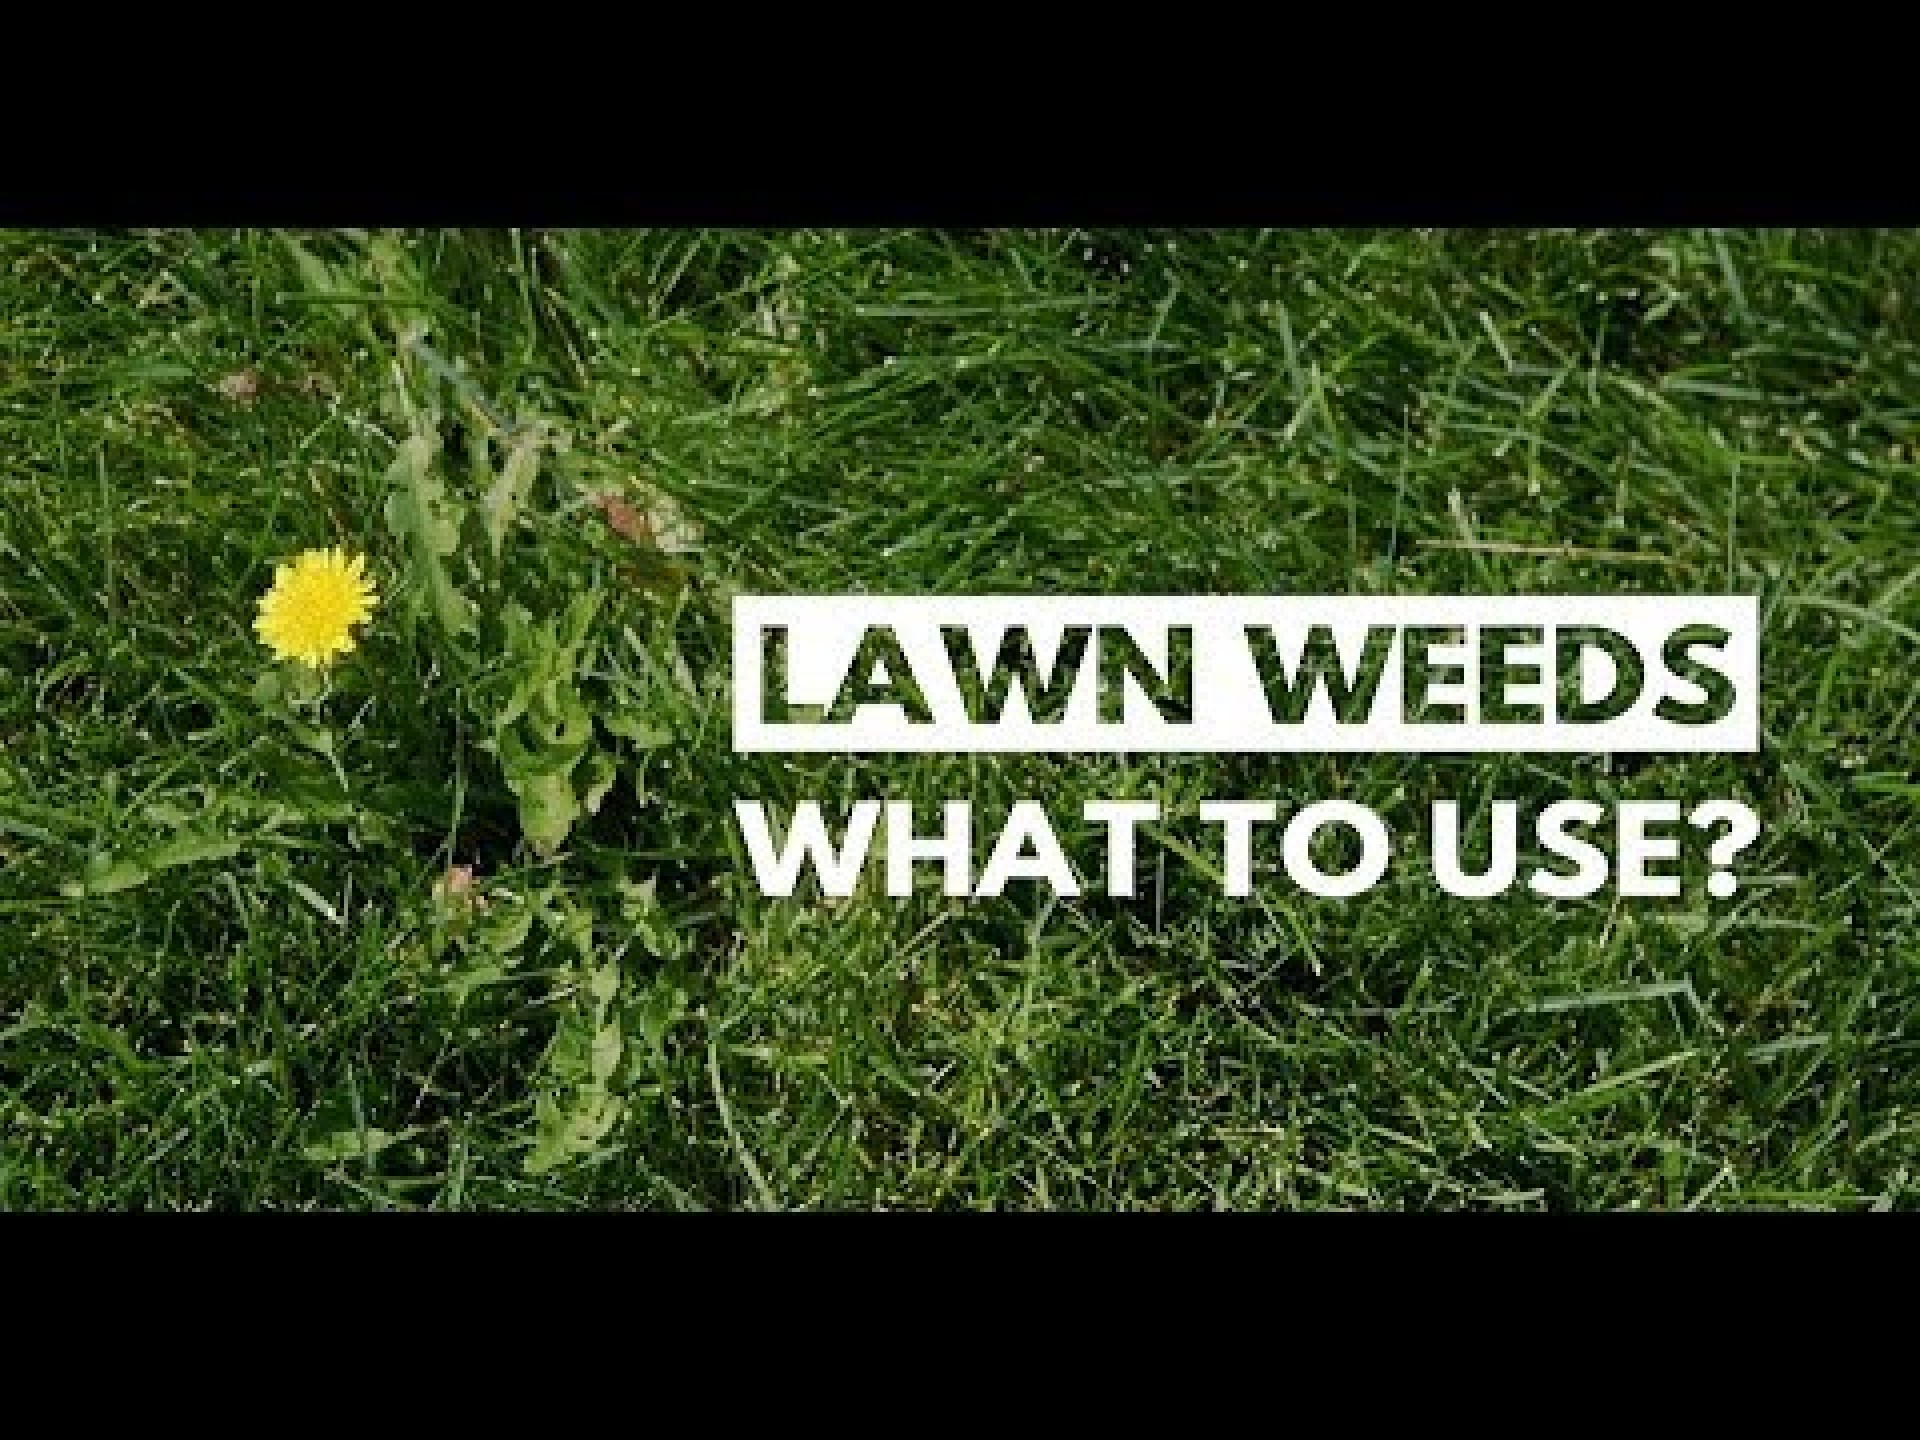 City of Kamloops - Lawn Weeds: What to Use